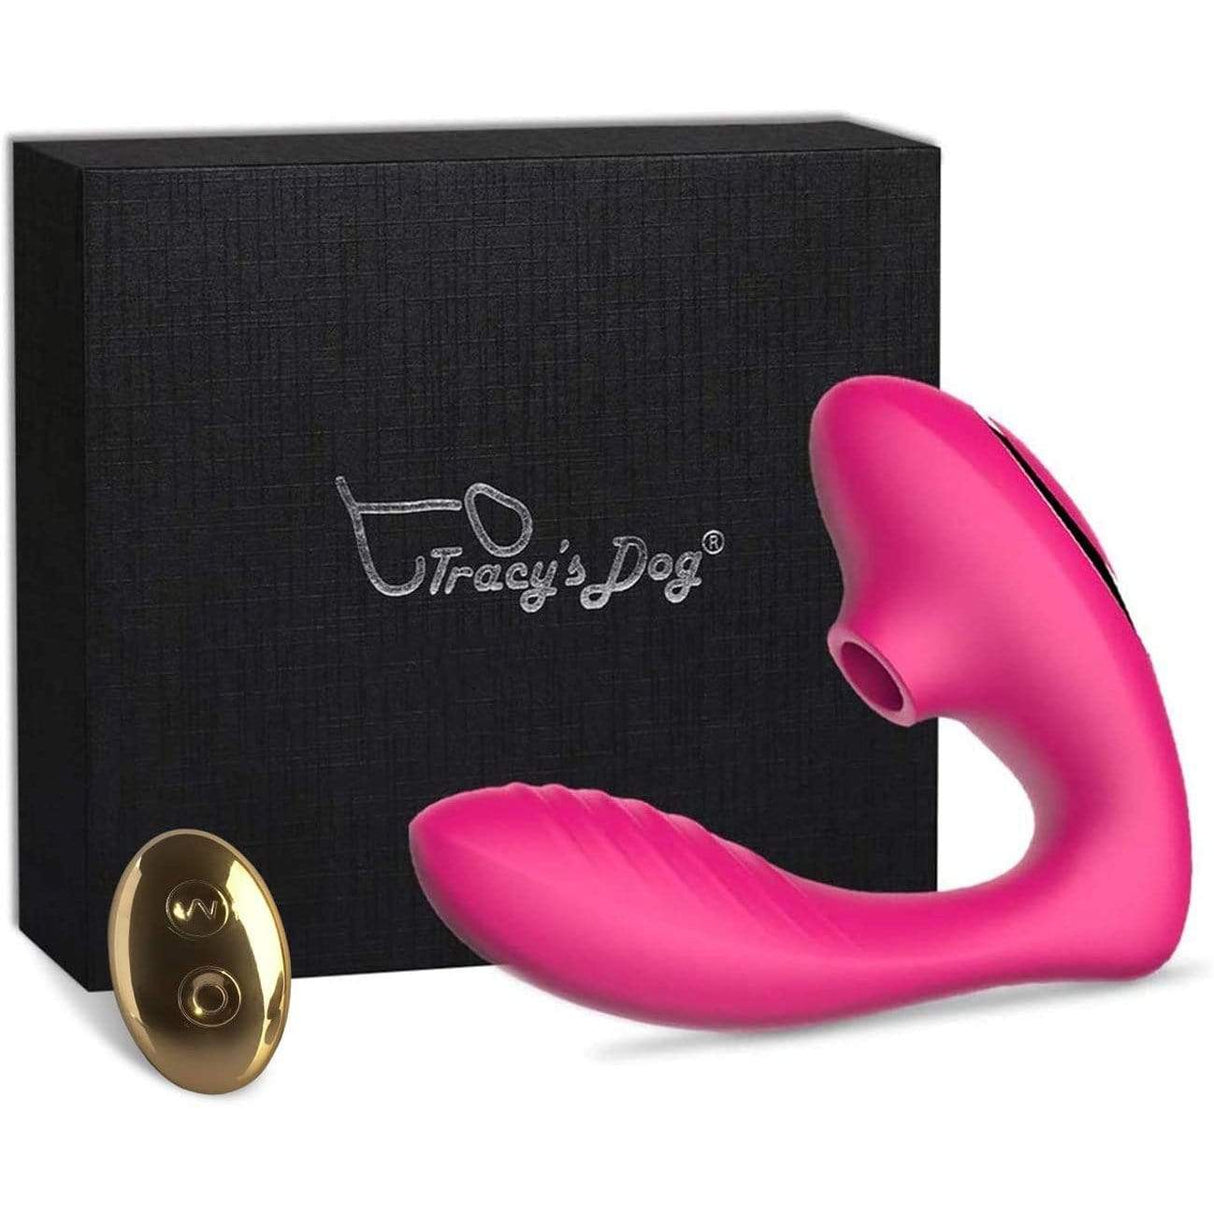 Tracy's Dog - Clitoral Air Stimulator Sucking Vibrator with Remote OG Pro 2 TRD1008 CherryAffairs